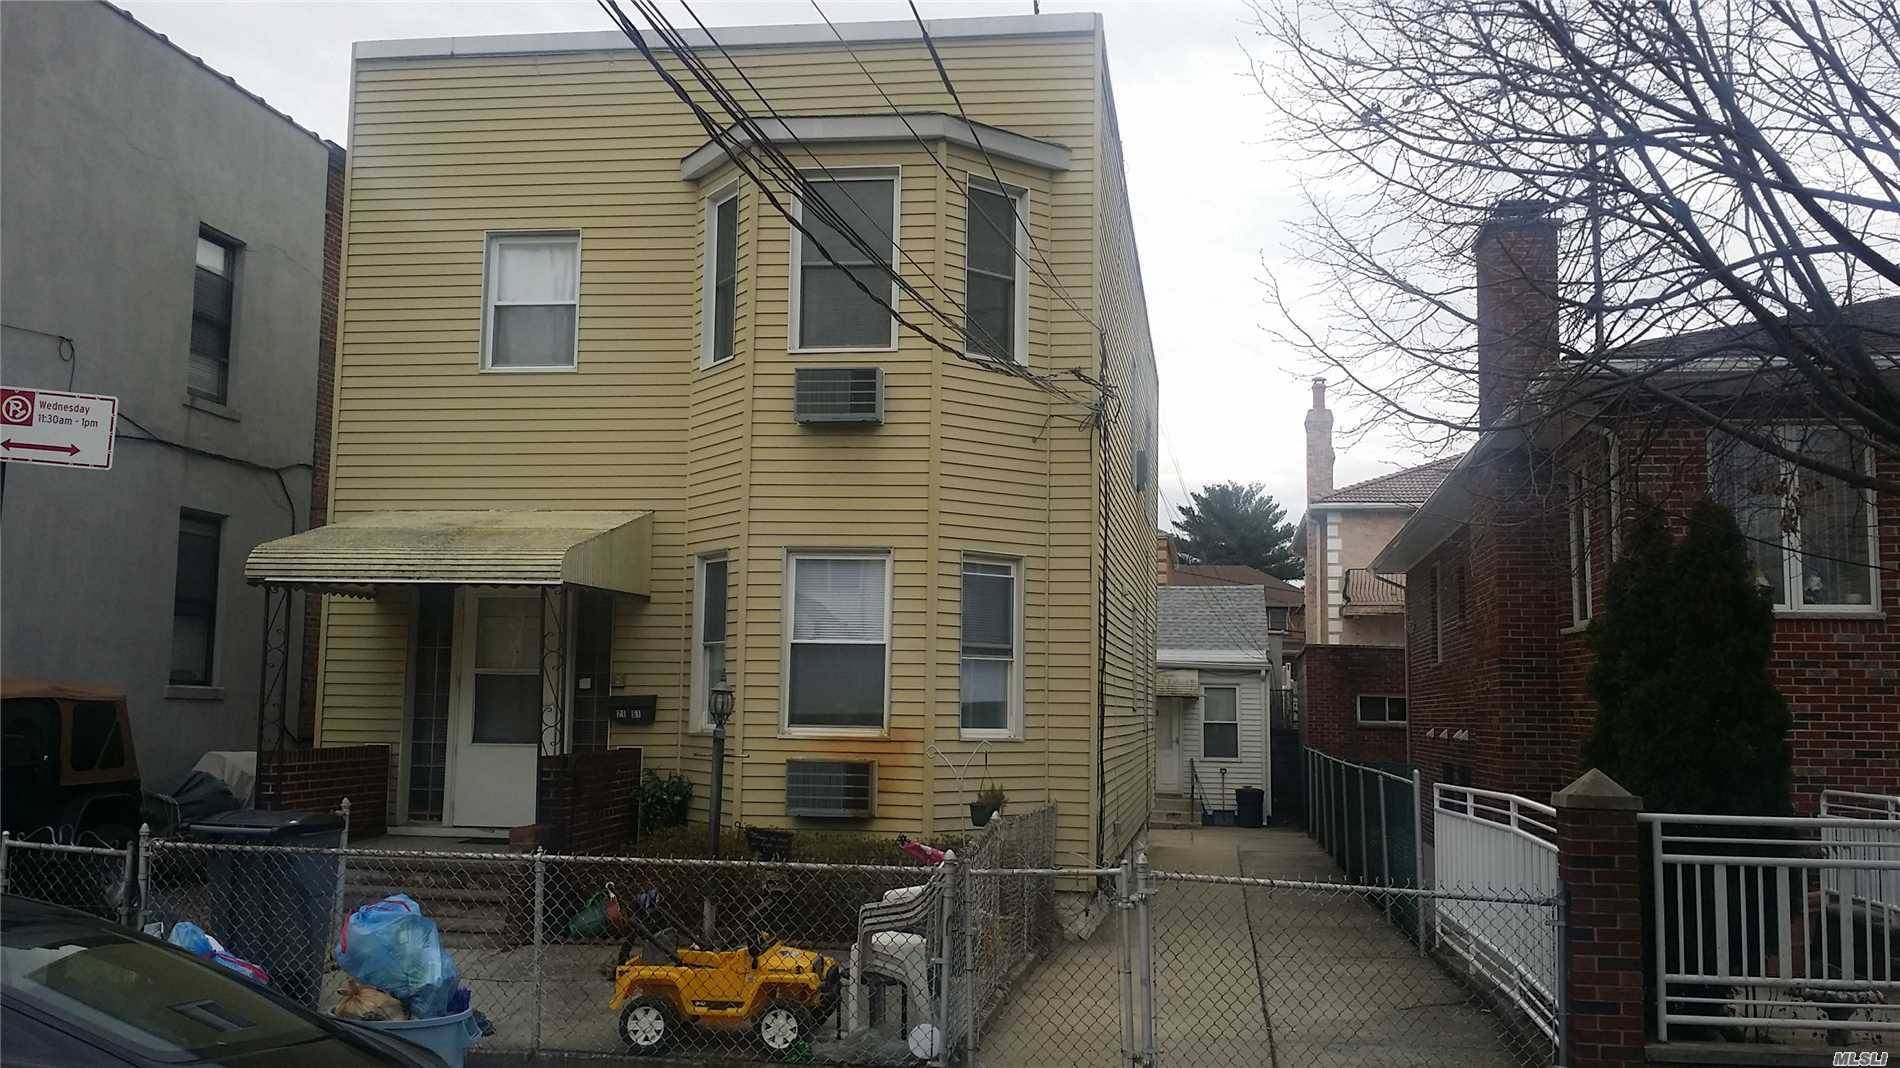 Unique Opportunity To Own A Residential 3 Family Property In Desirable Upper Astoria Ditmars Area.